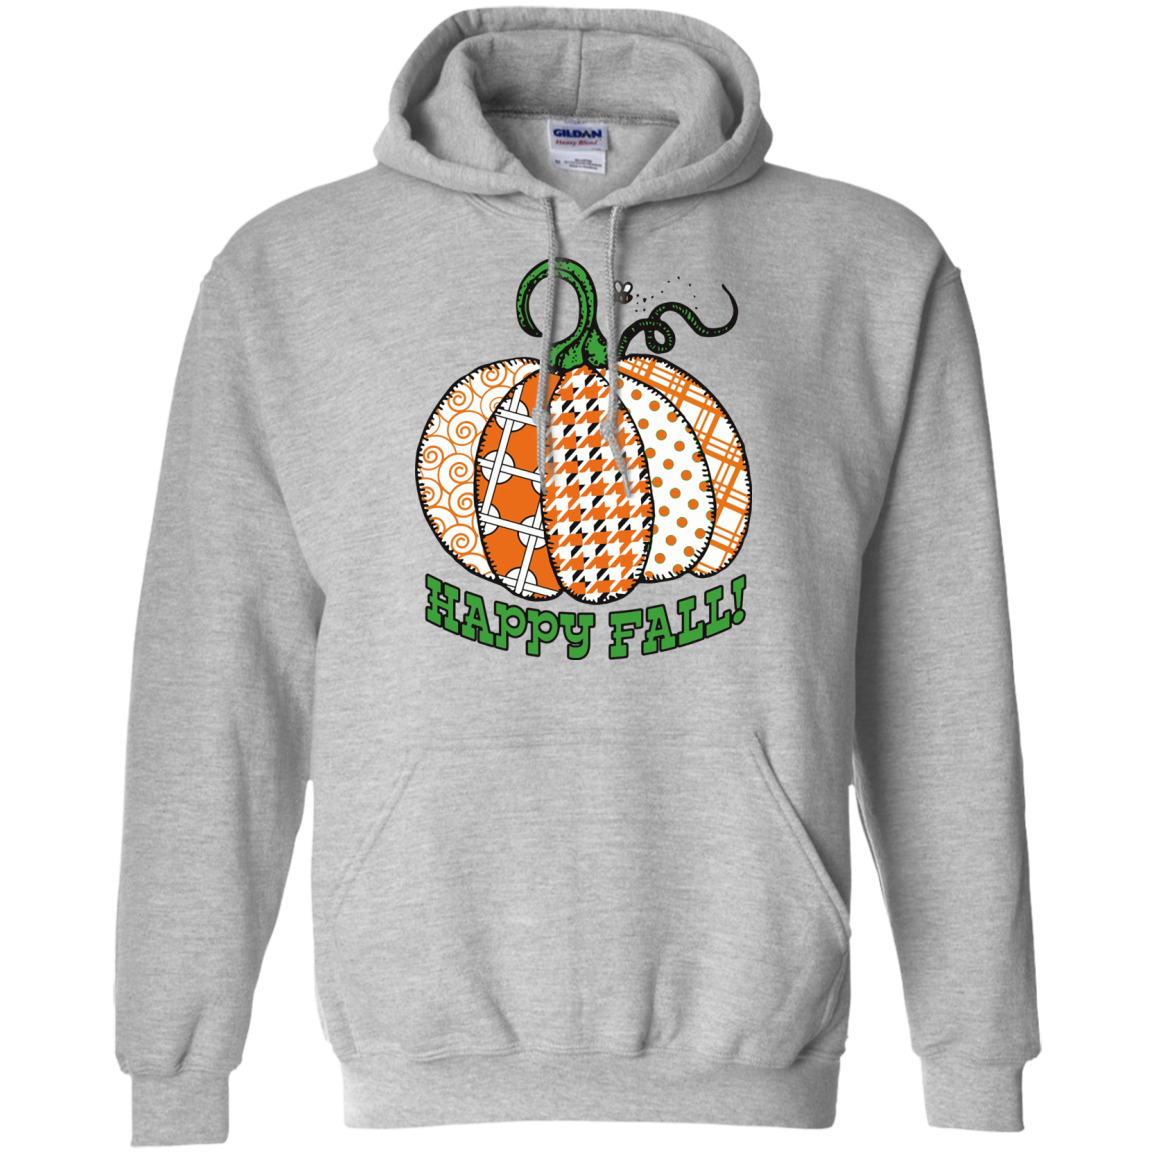 Happy Fall! Pullover Hoodies - Crafter4Life - 3